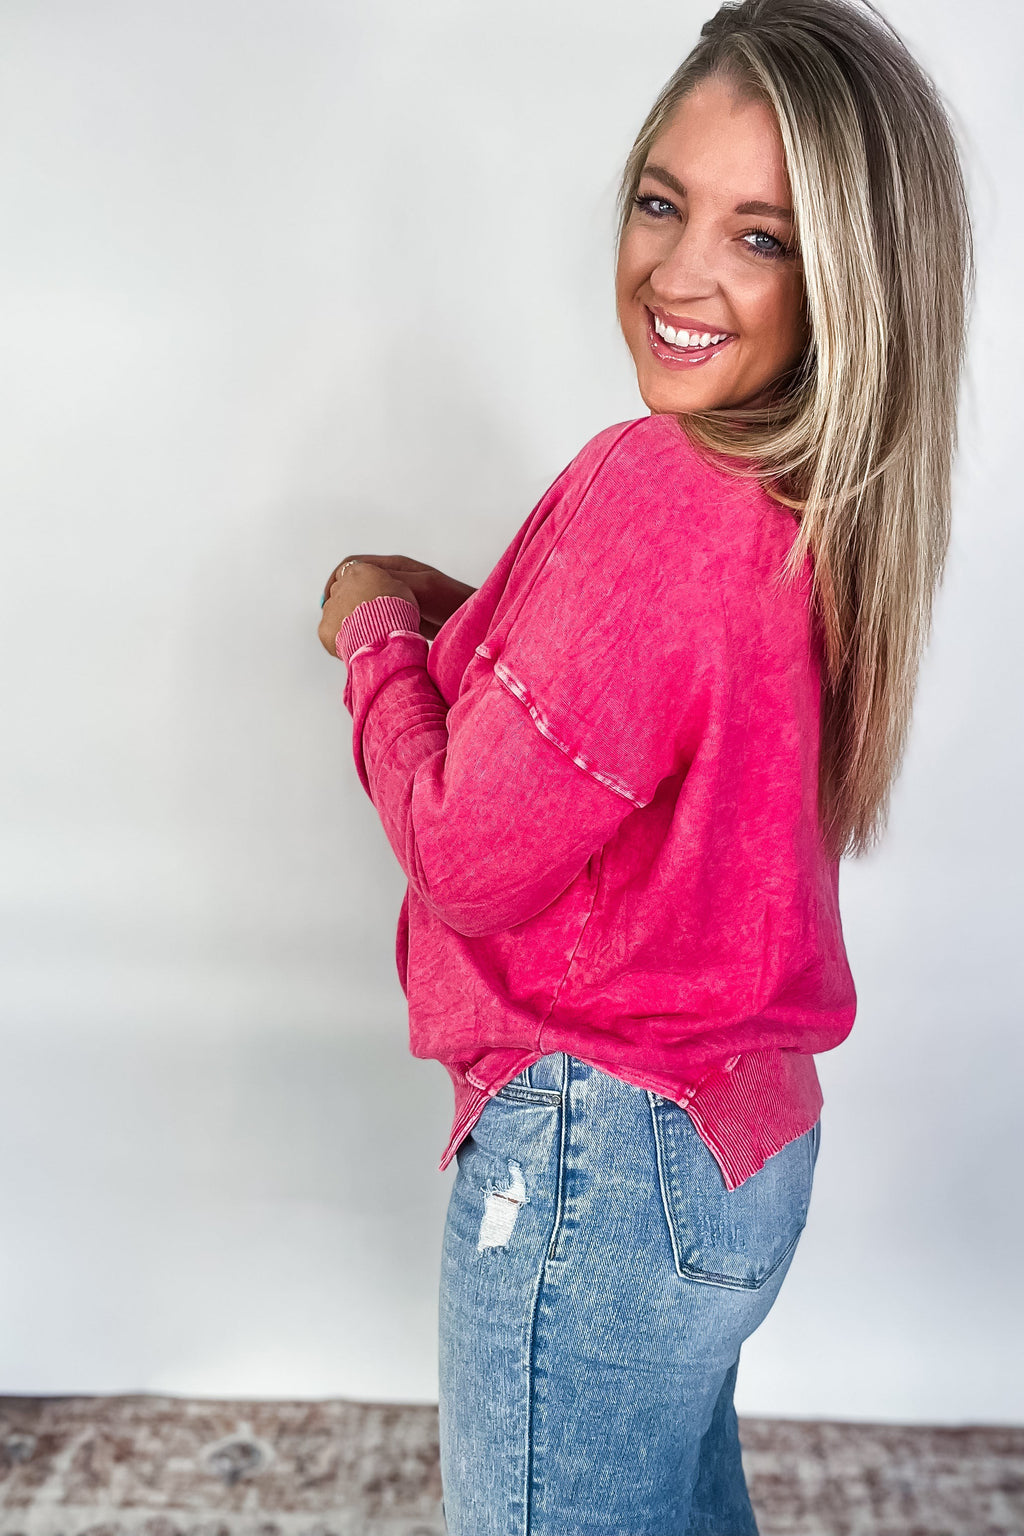 Easy Going - Long Sleeve Solid Knit Top - Fuchsia